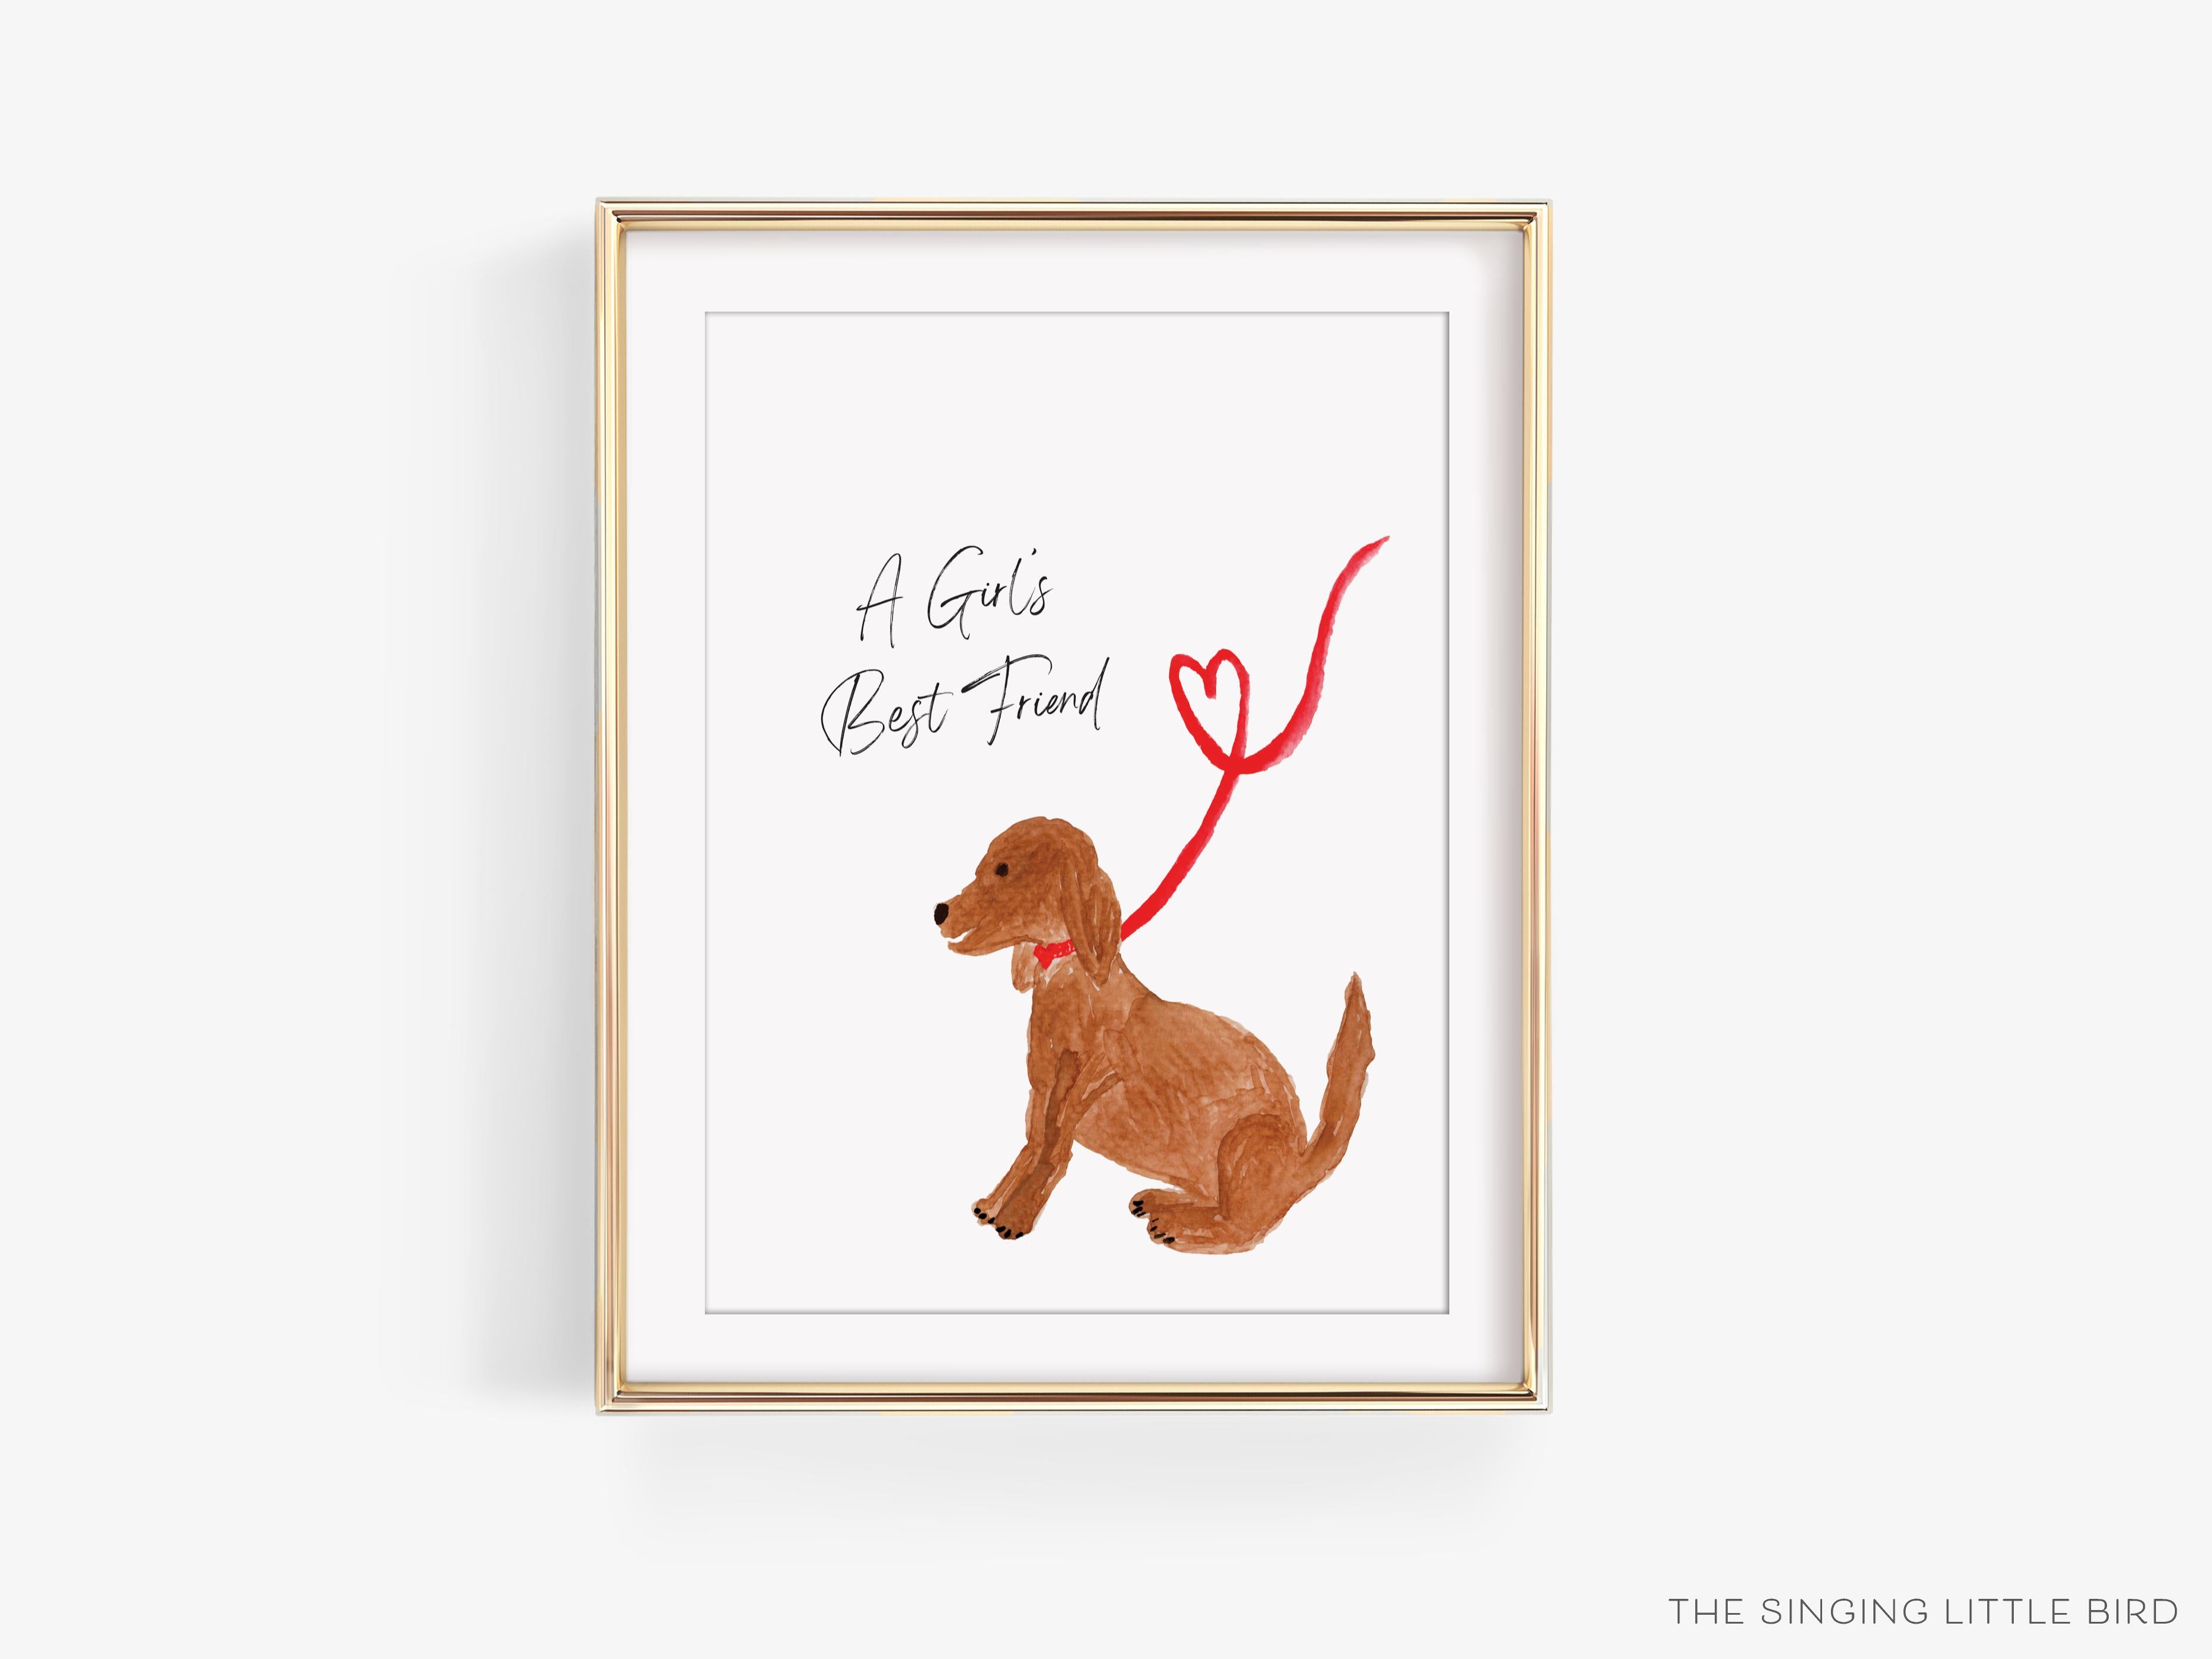 A Girl's Best Friend Dog Art Print-This watercolor art print features our hand-painted dog, printed in the USA on 120lb high quality art paper. This makes a great gift or wall decor for the animal lover in your life.-The Singing Little Bird